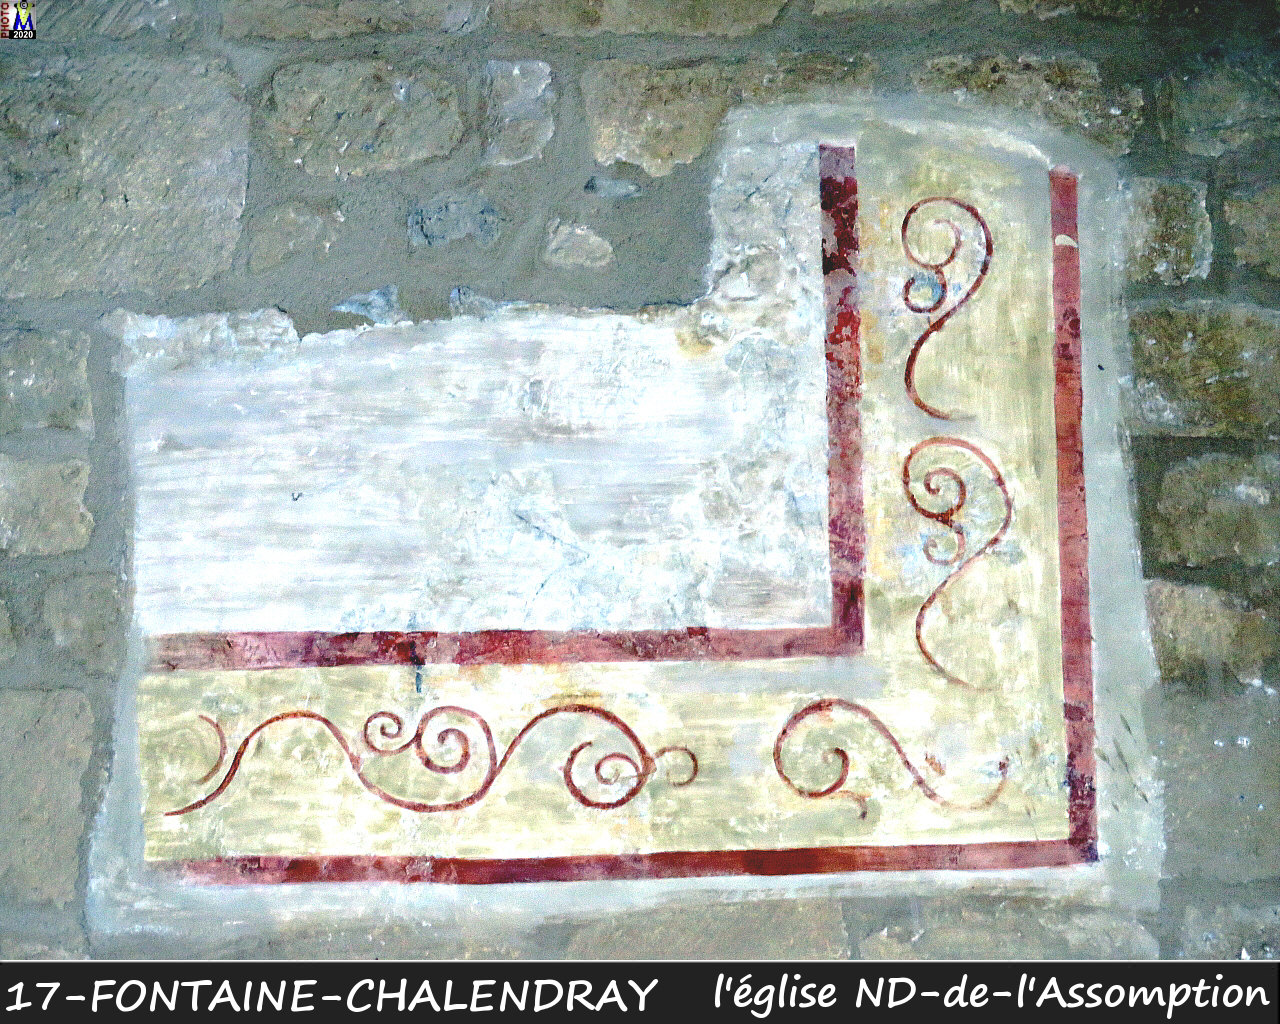 17FONTAINE-CHALENDRAY_eglise_1144.jpg